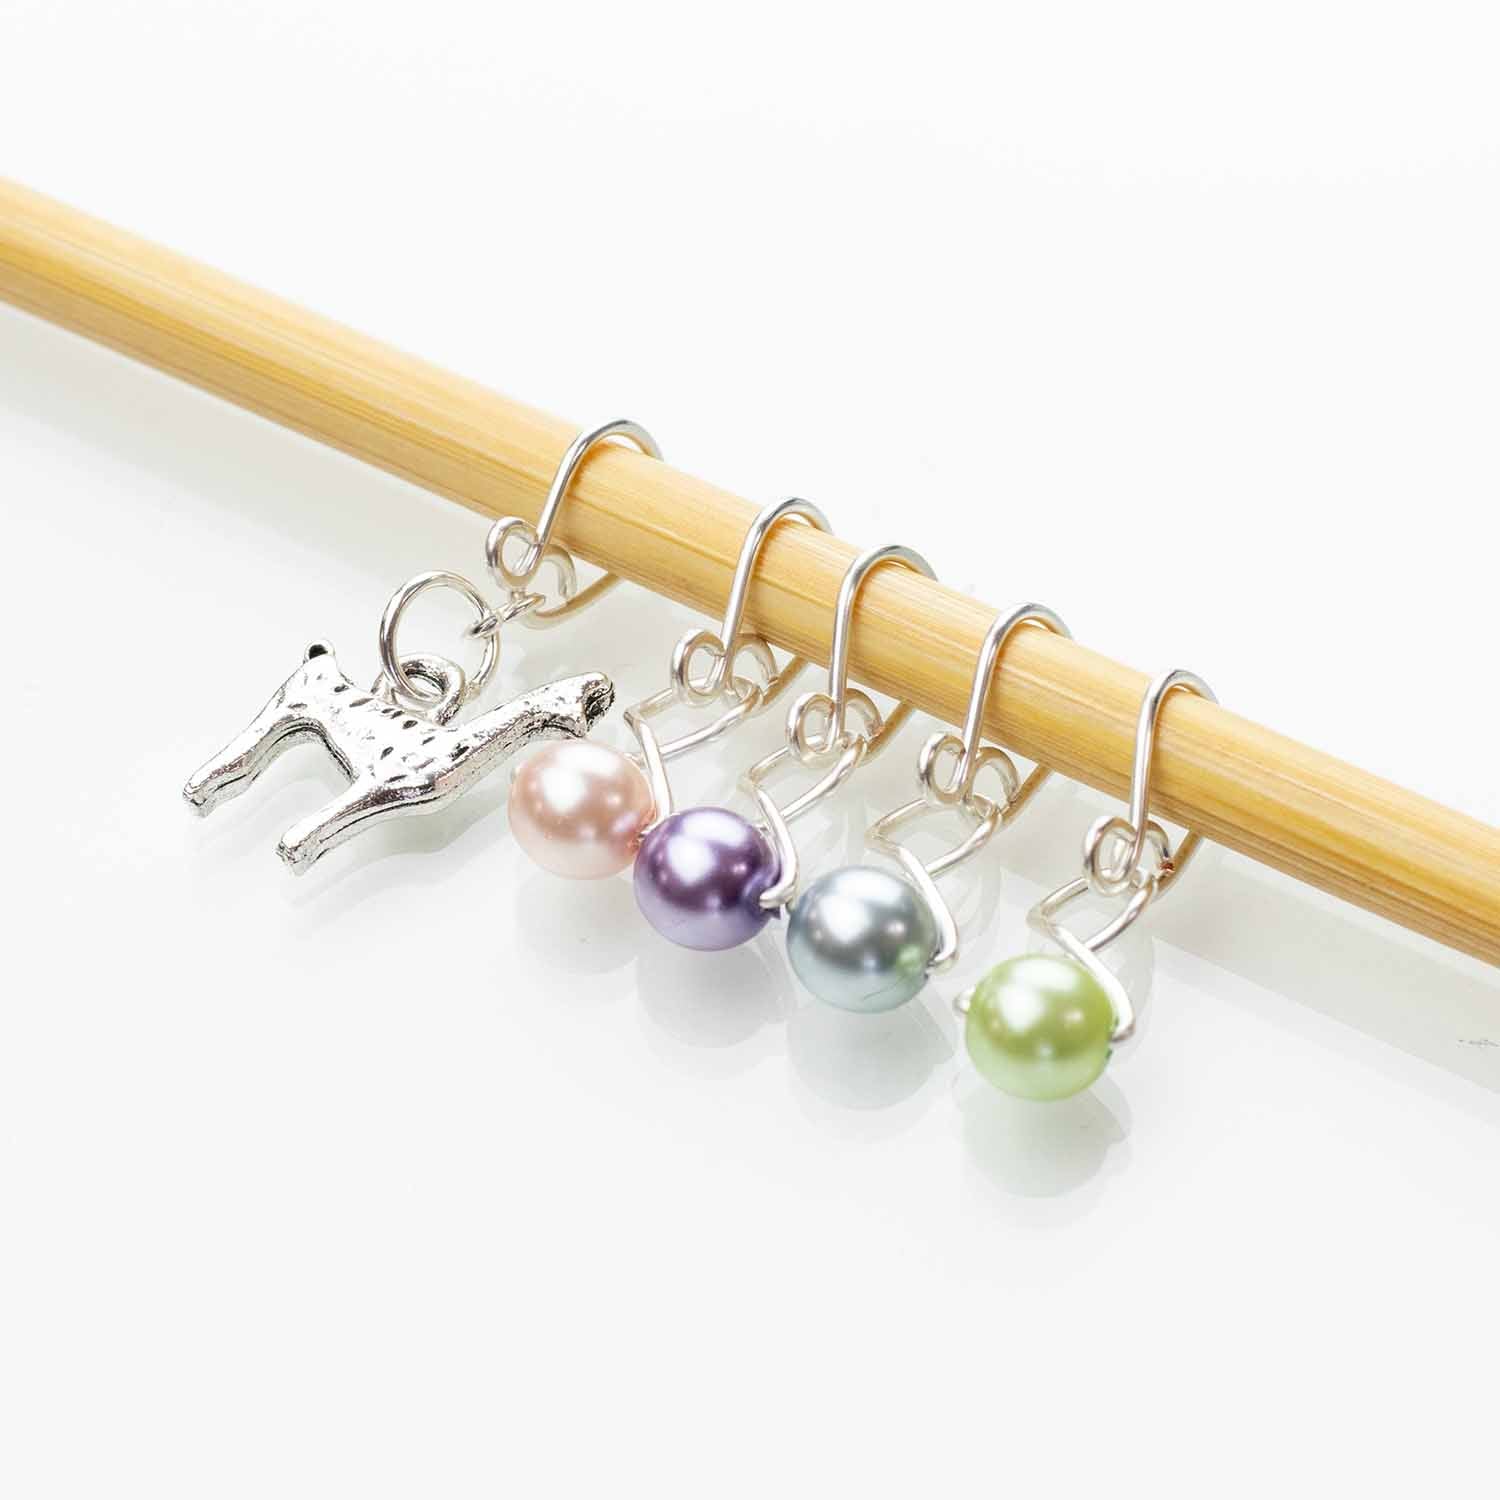 All the EXTRA LARGE Stitch Markers! US15/10mm